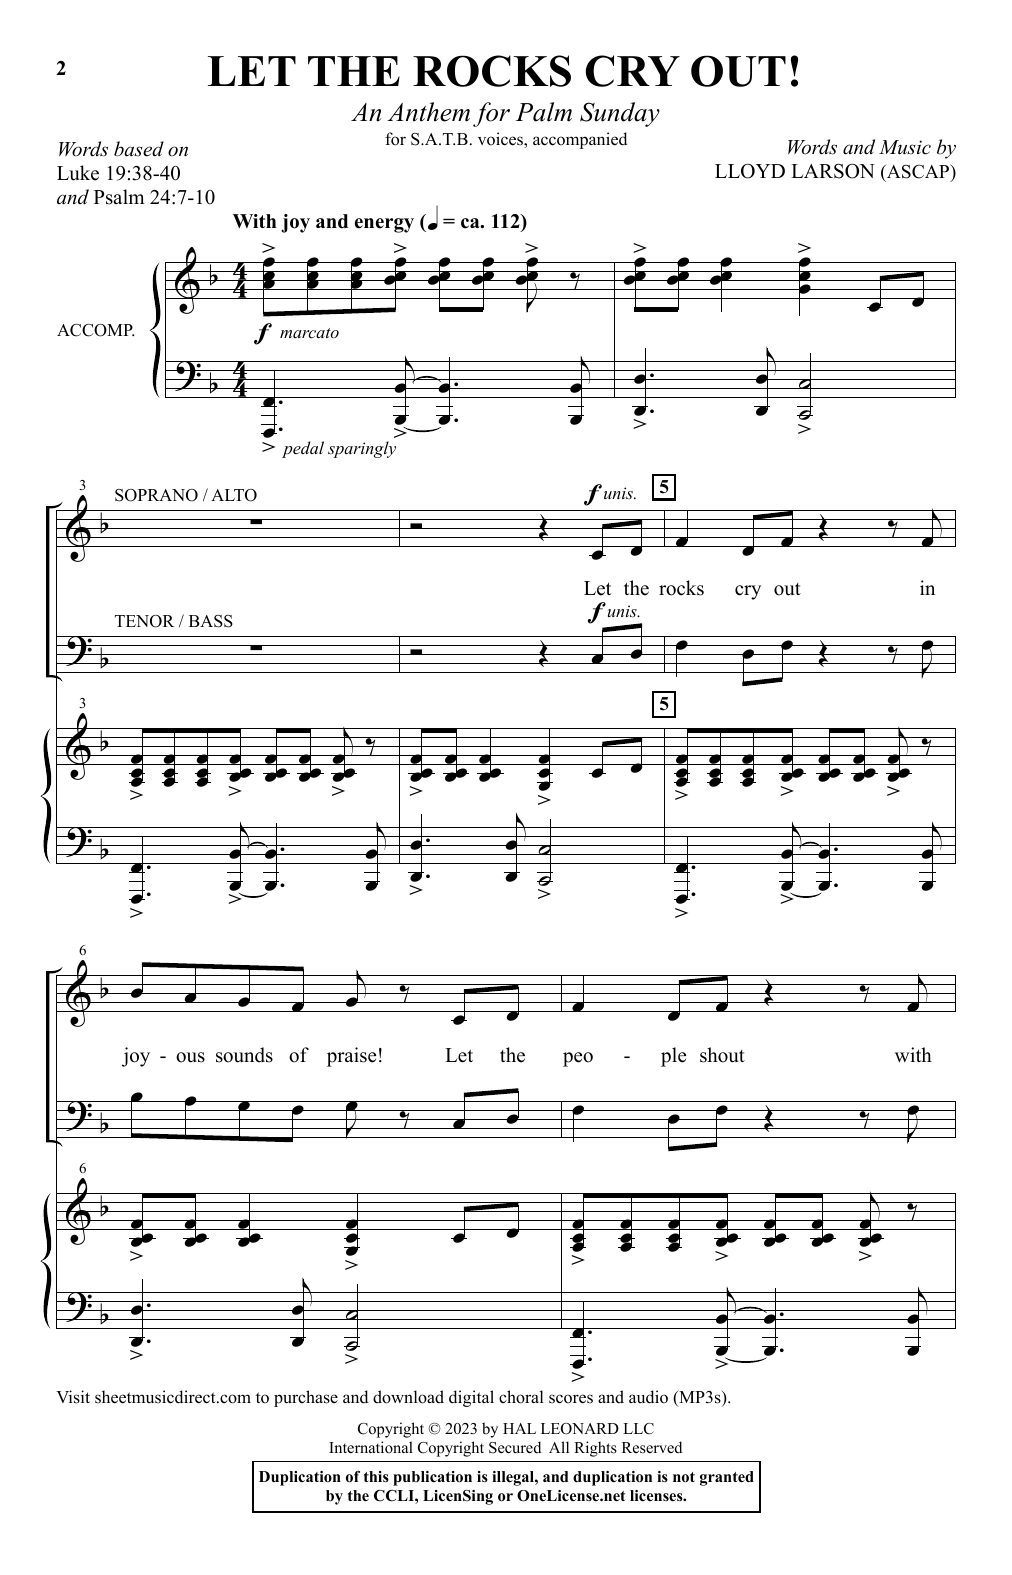 Download Lloyd Larson Let The Rocks Cry Out! (An Anthem For P Sheet Music